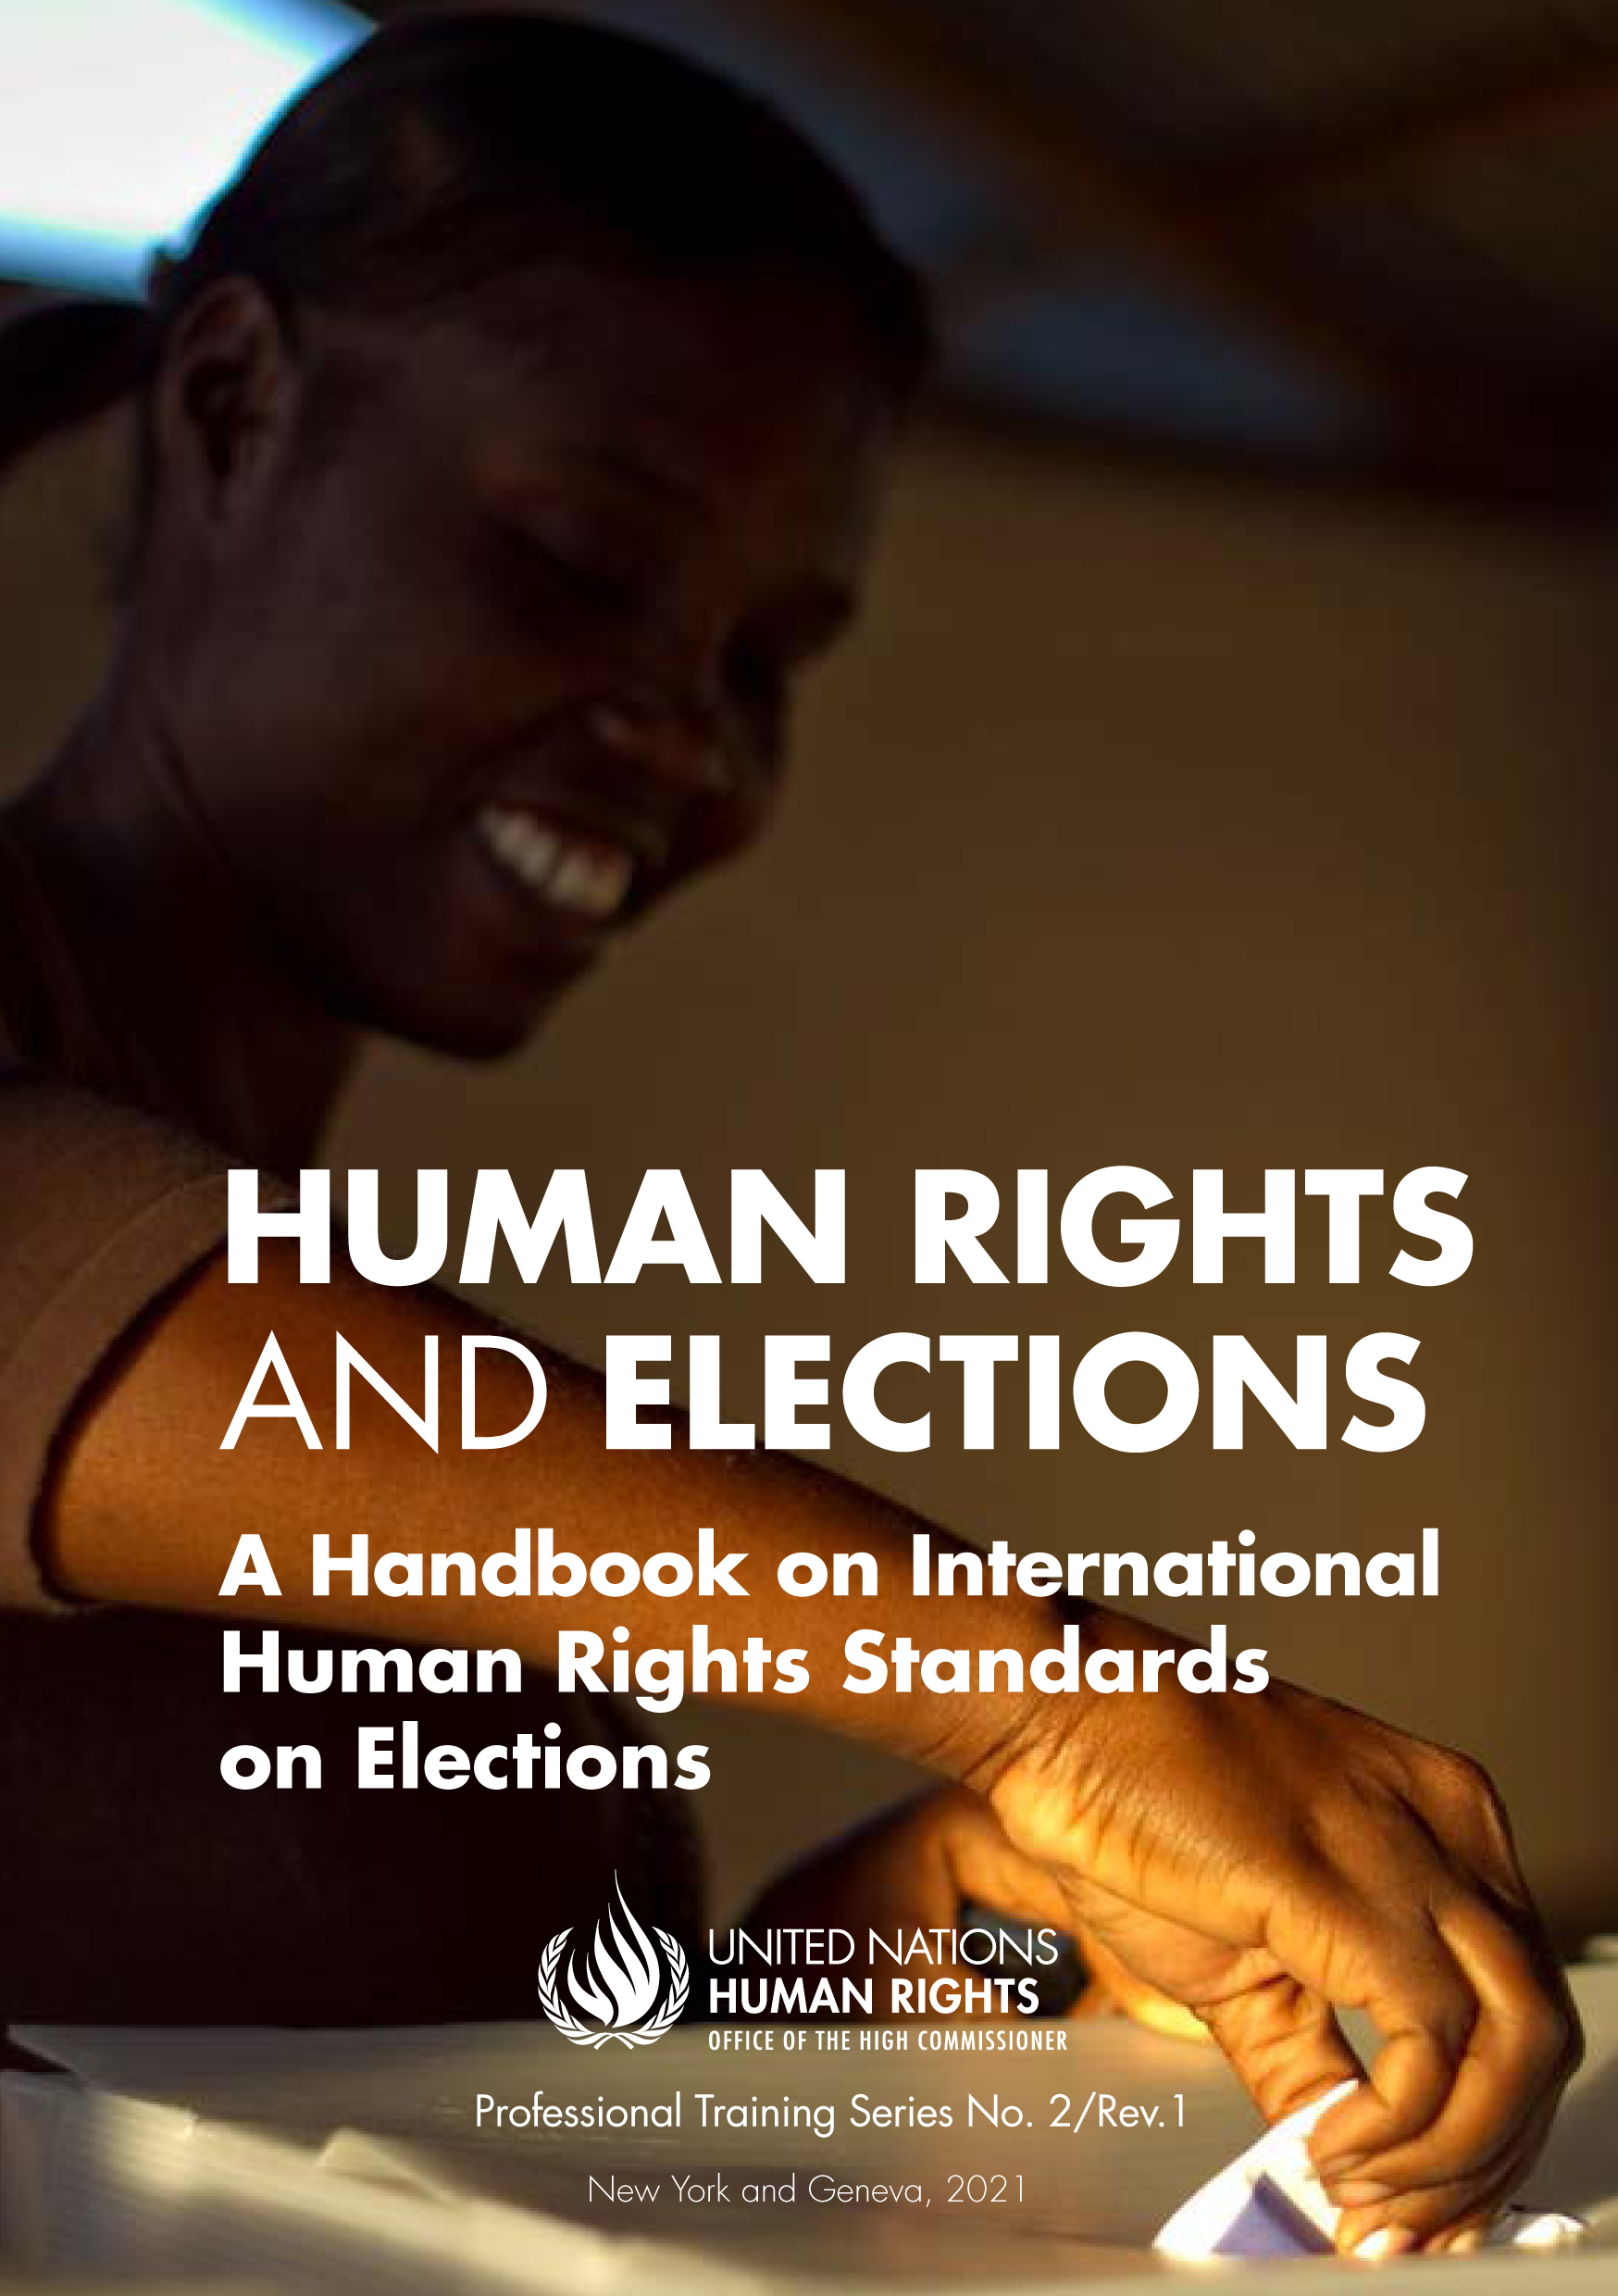 Human Rights and Elections